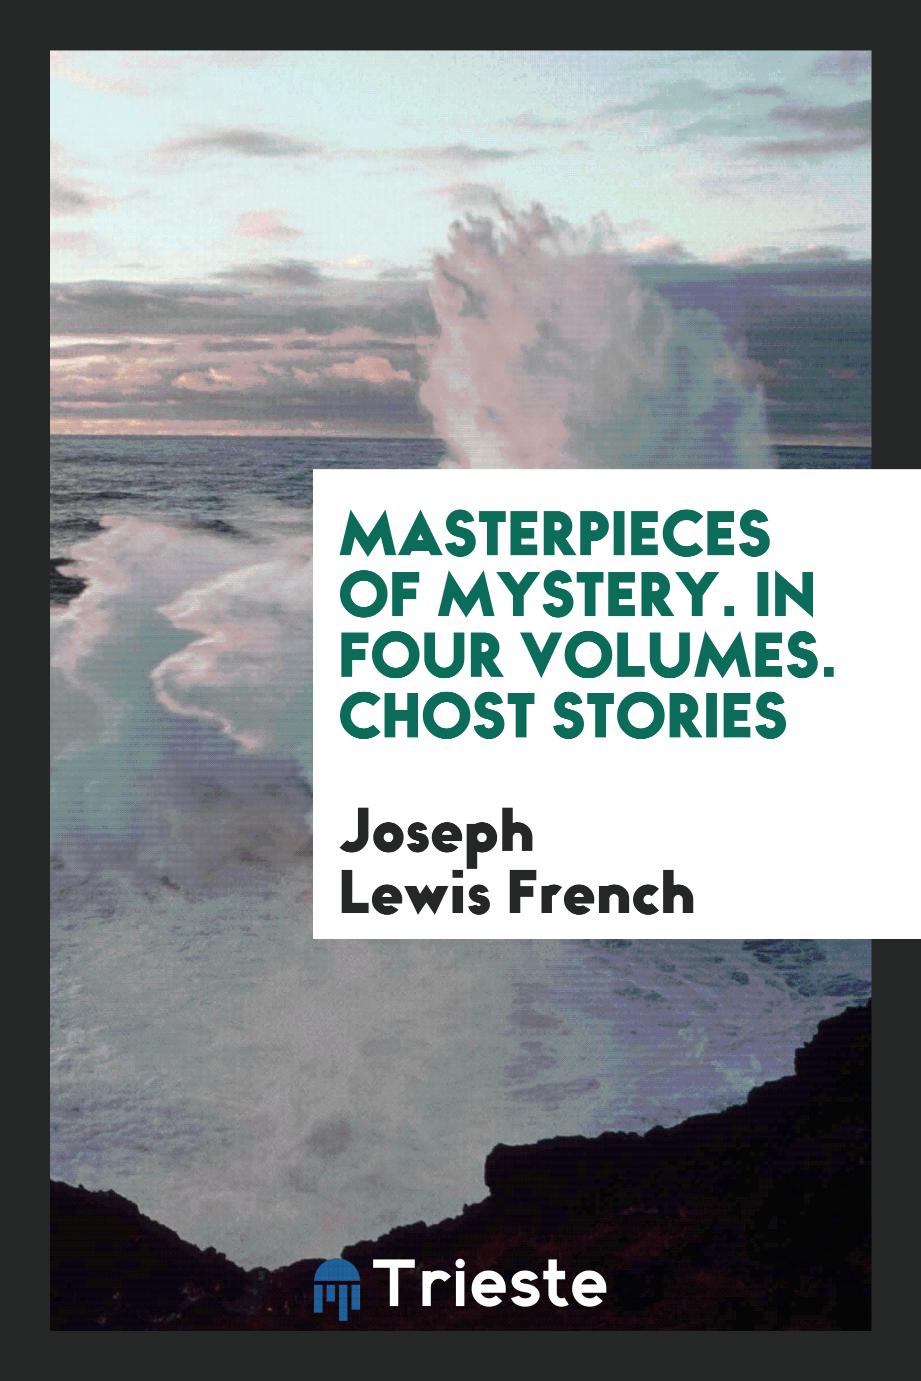 Masterpieces of mystery. In four Volumes. Chost stories